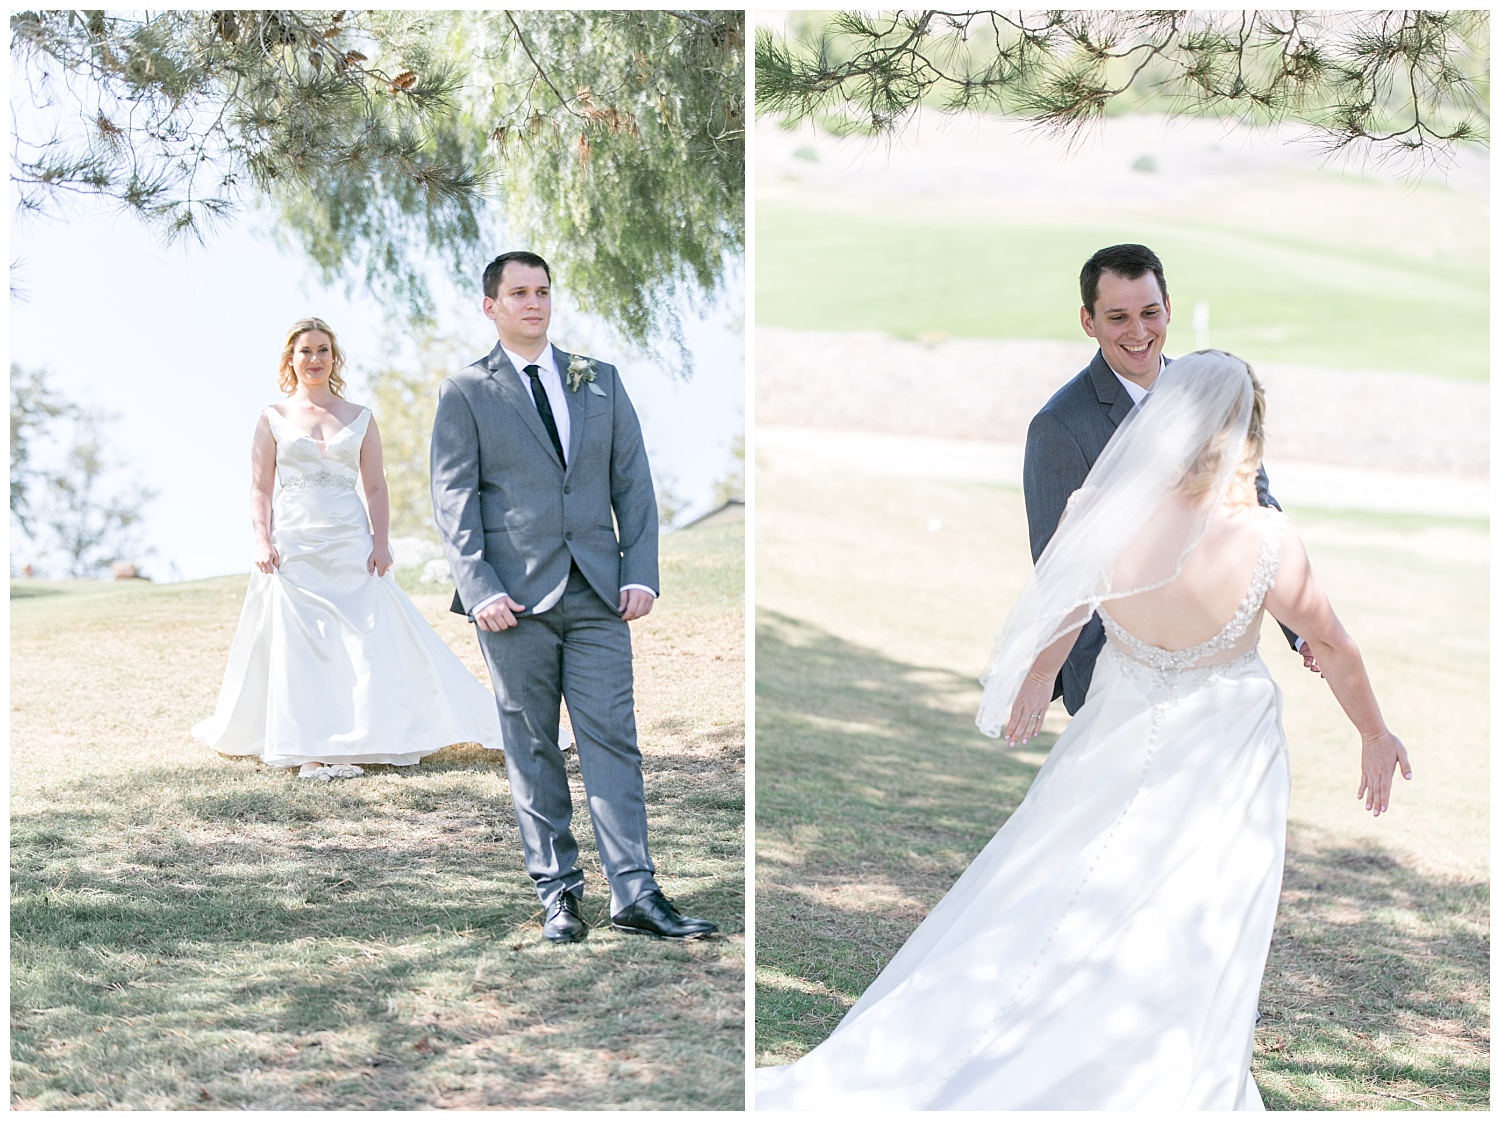 catherine + tim - bella collina golf course - san clemente california - wedding party - bride and groom couples portraits-0040